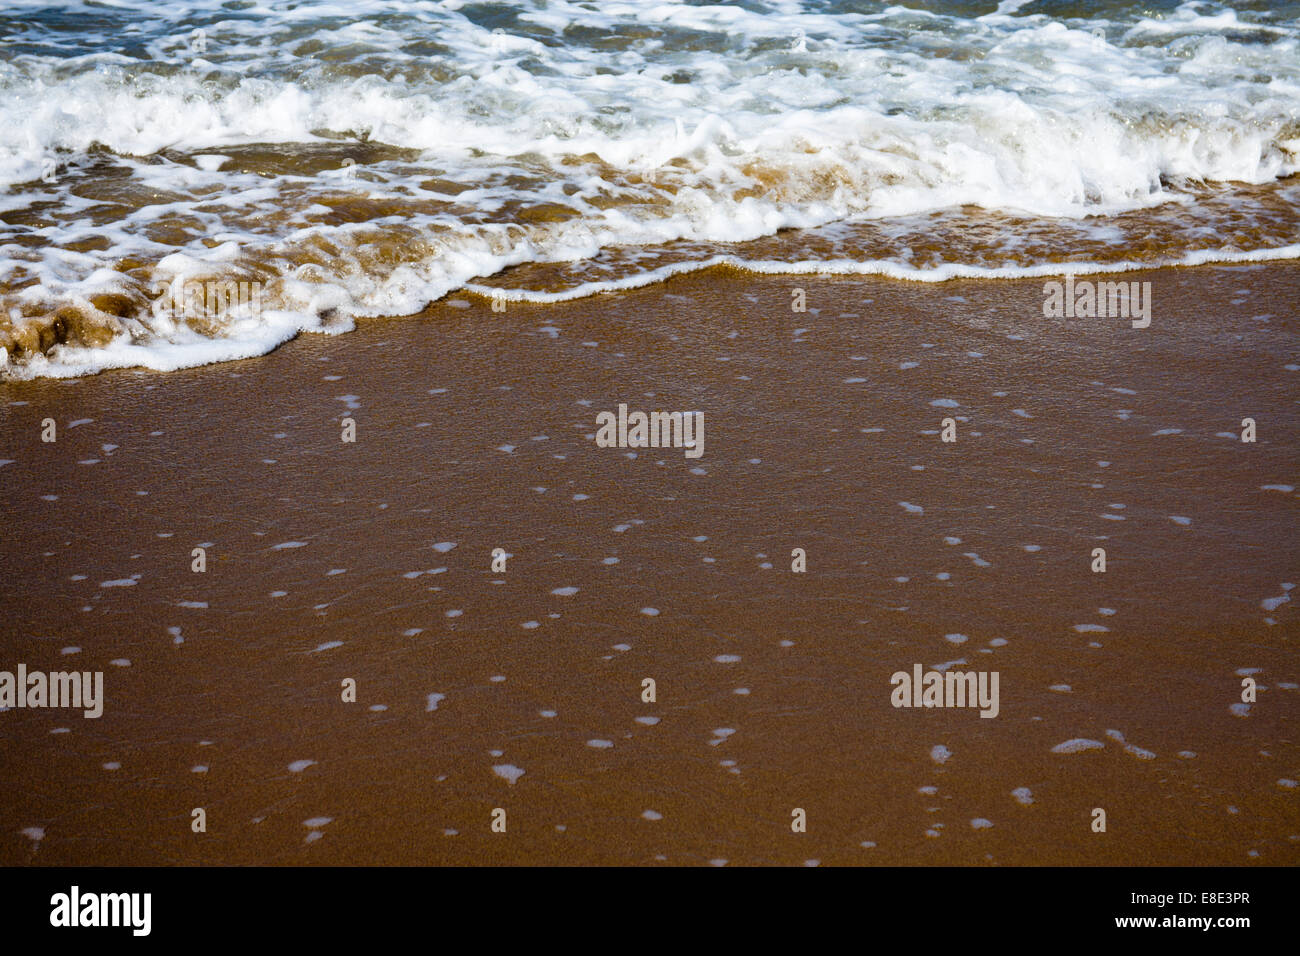 Shallow focus image of waves lapping onto a beach Stock Photo